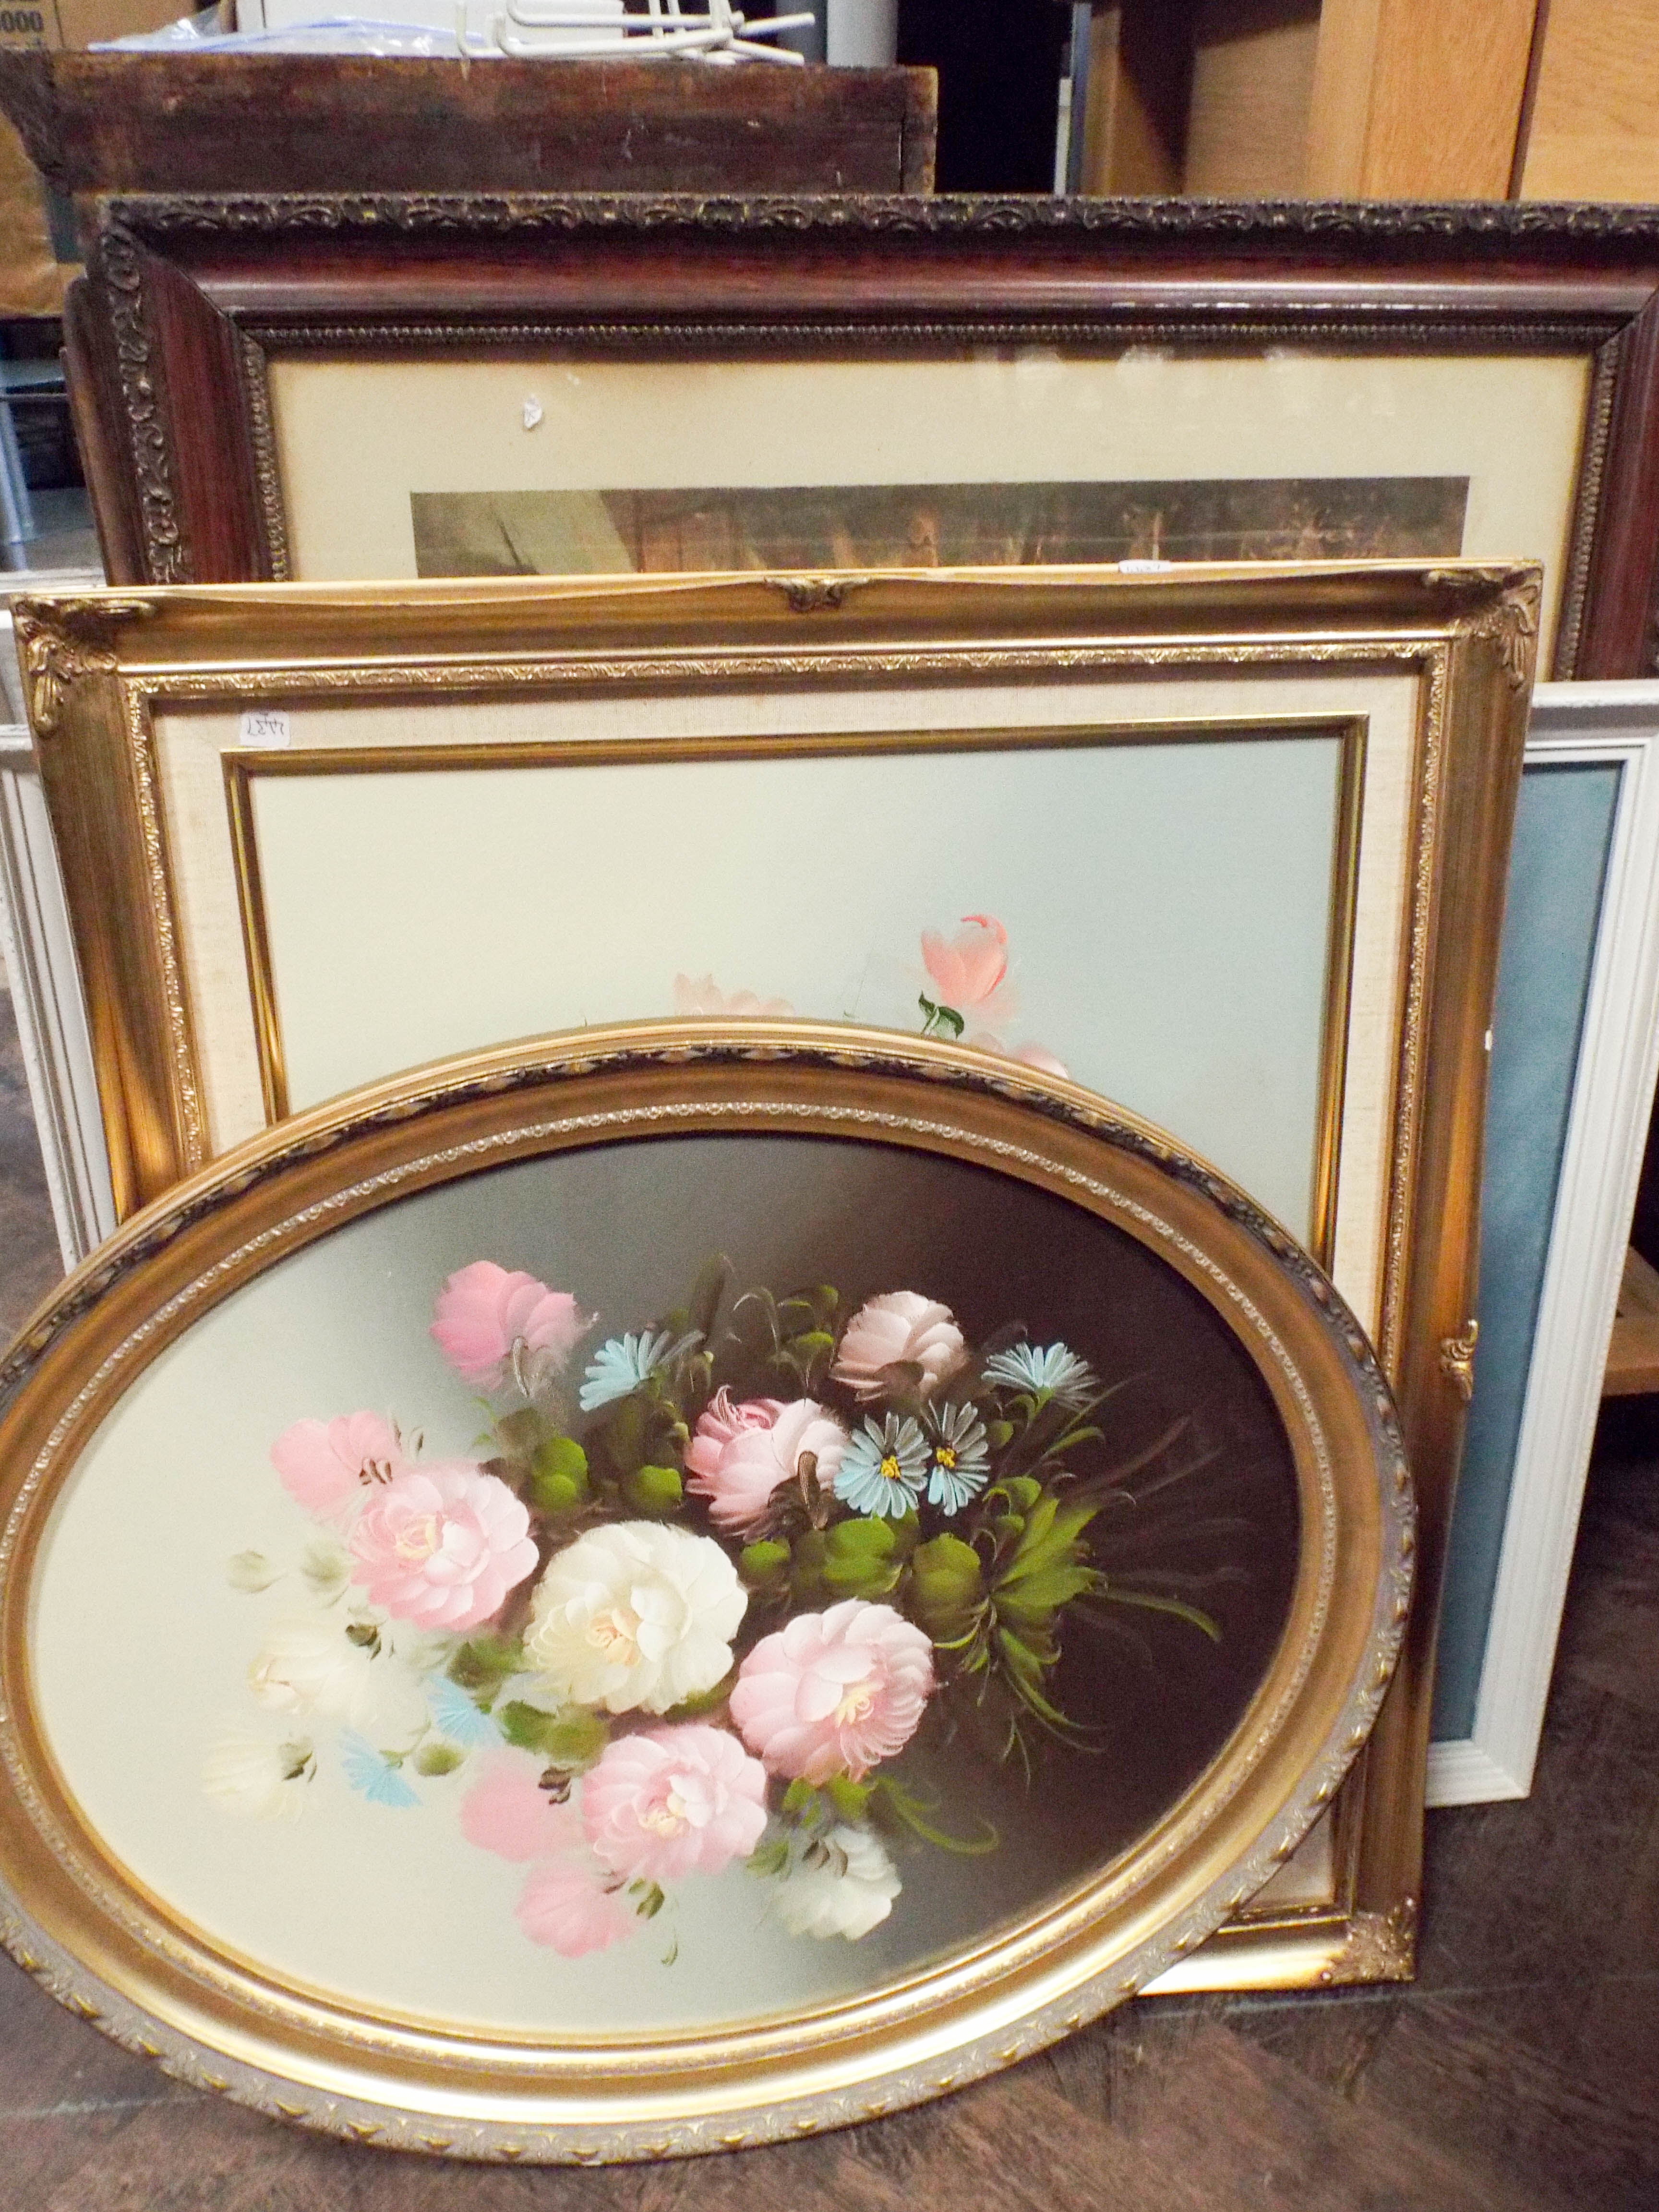 Two paintings of flowers,